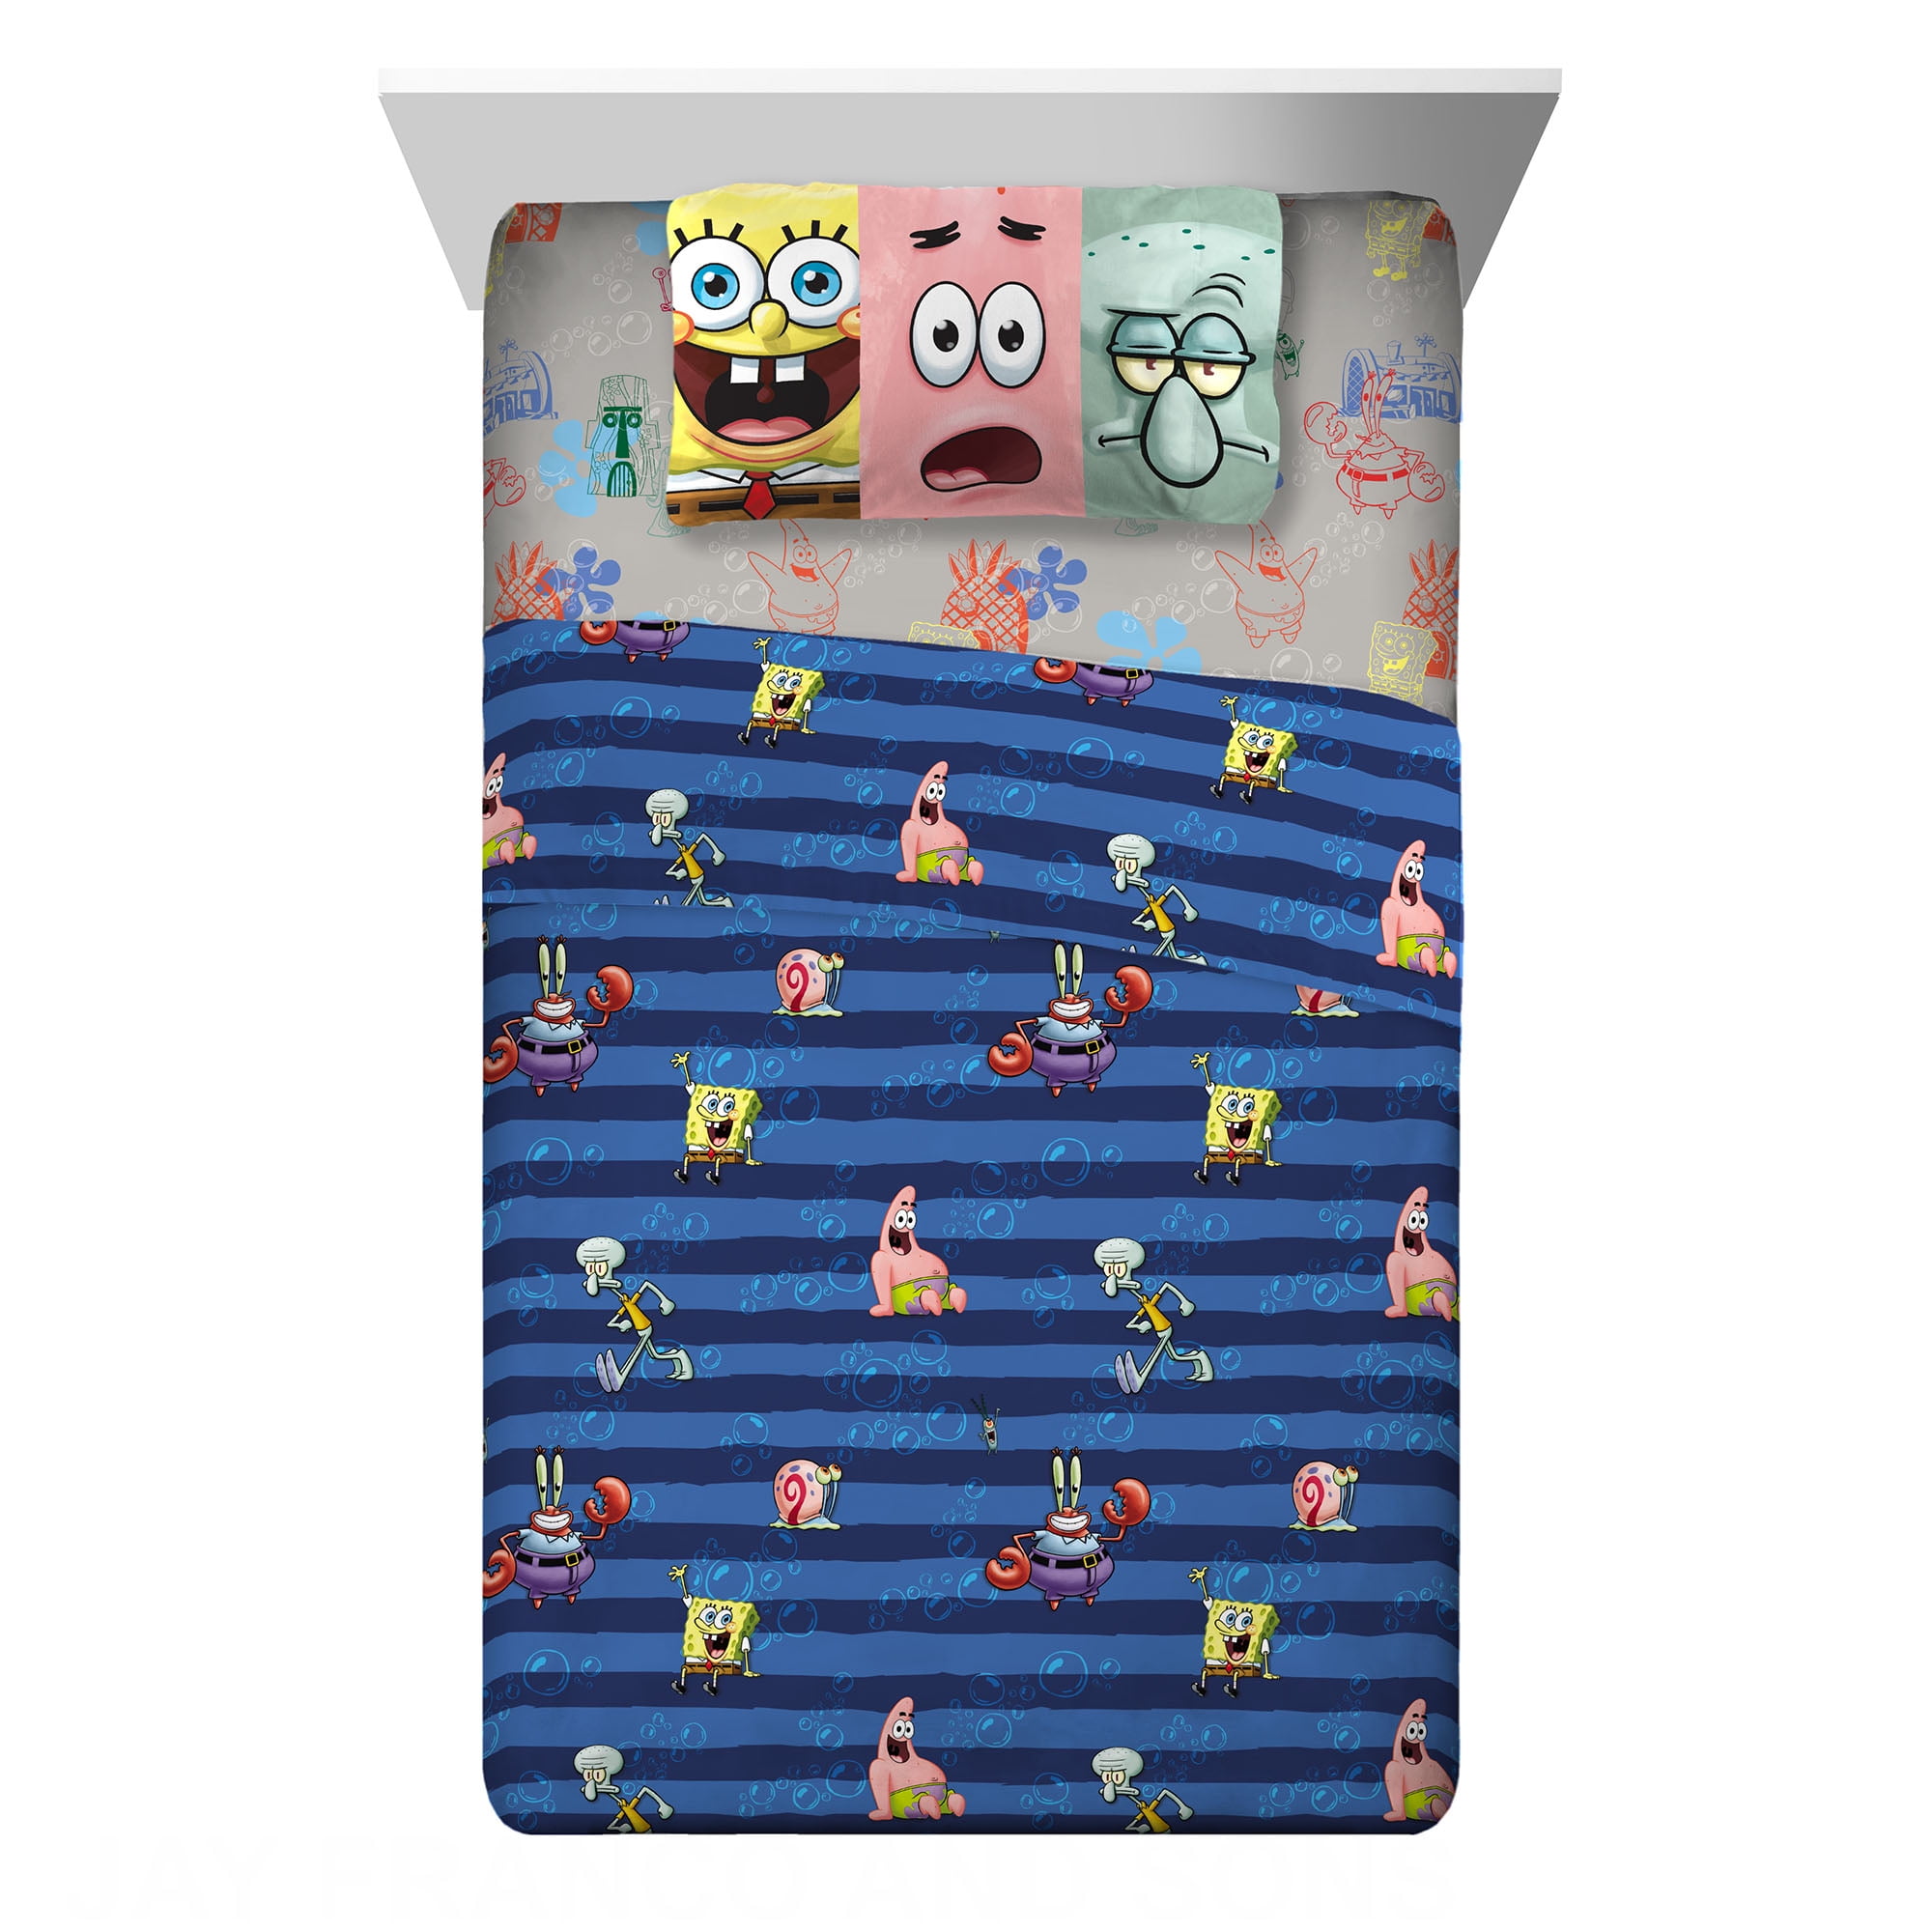 SPONGEBOB SQUARE PANTS JELLY FISH HUNTING TWIN FITTED SHEET & PILLOWCASE 